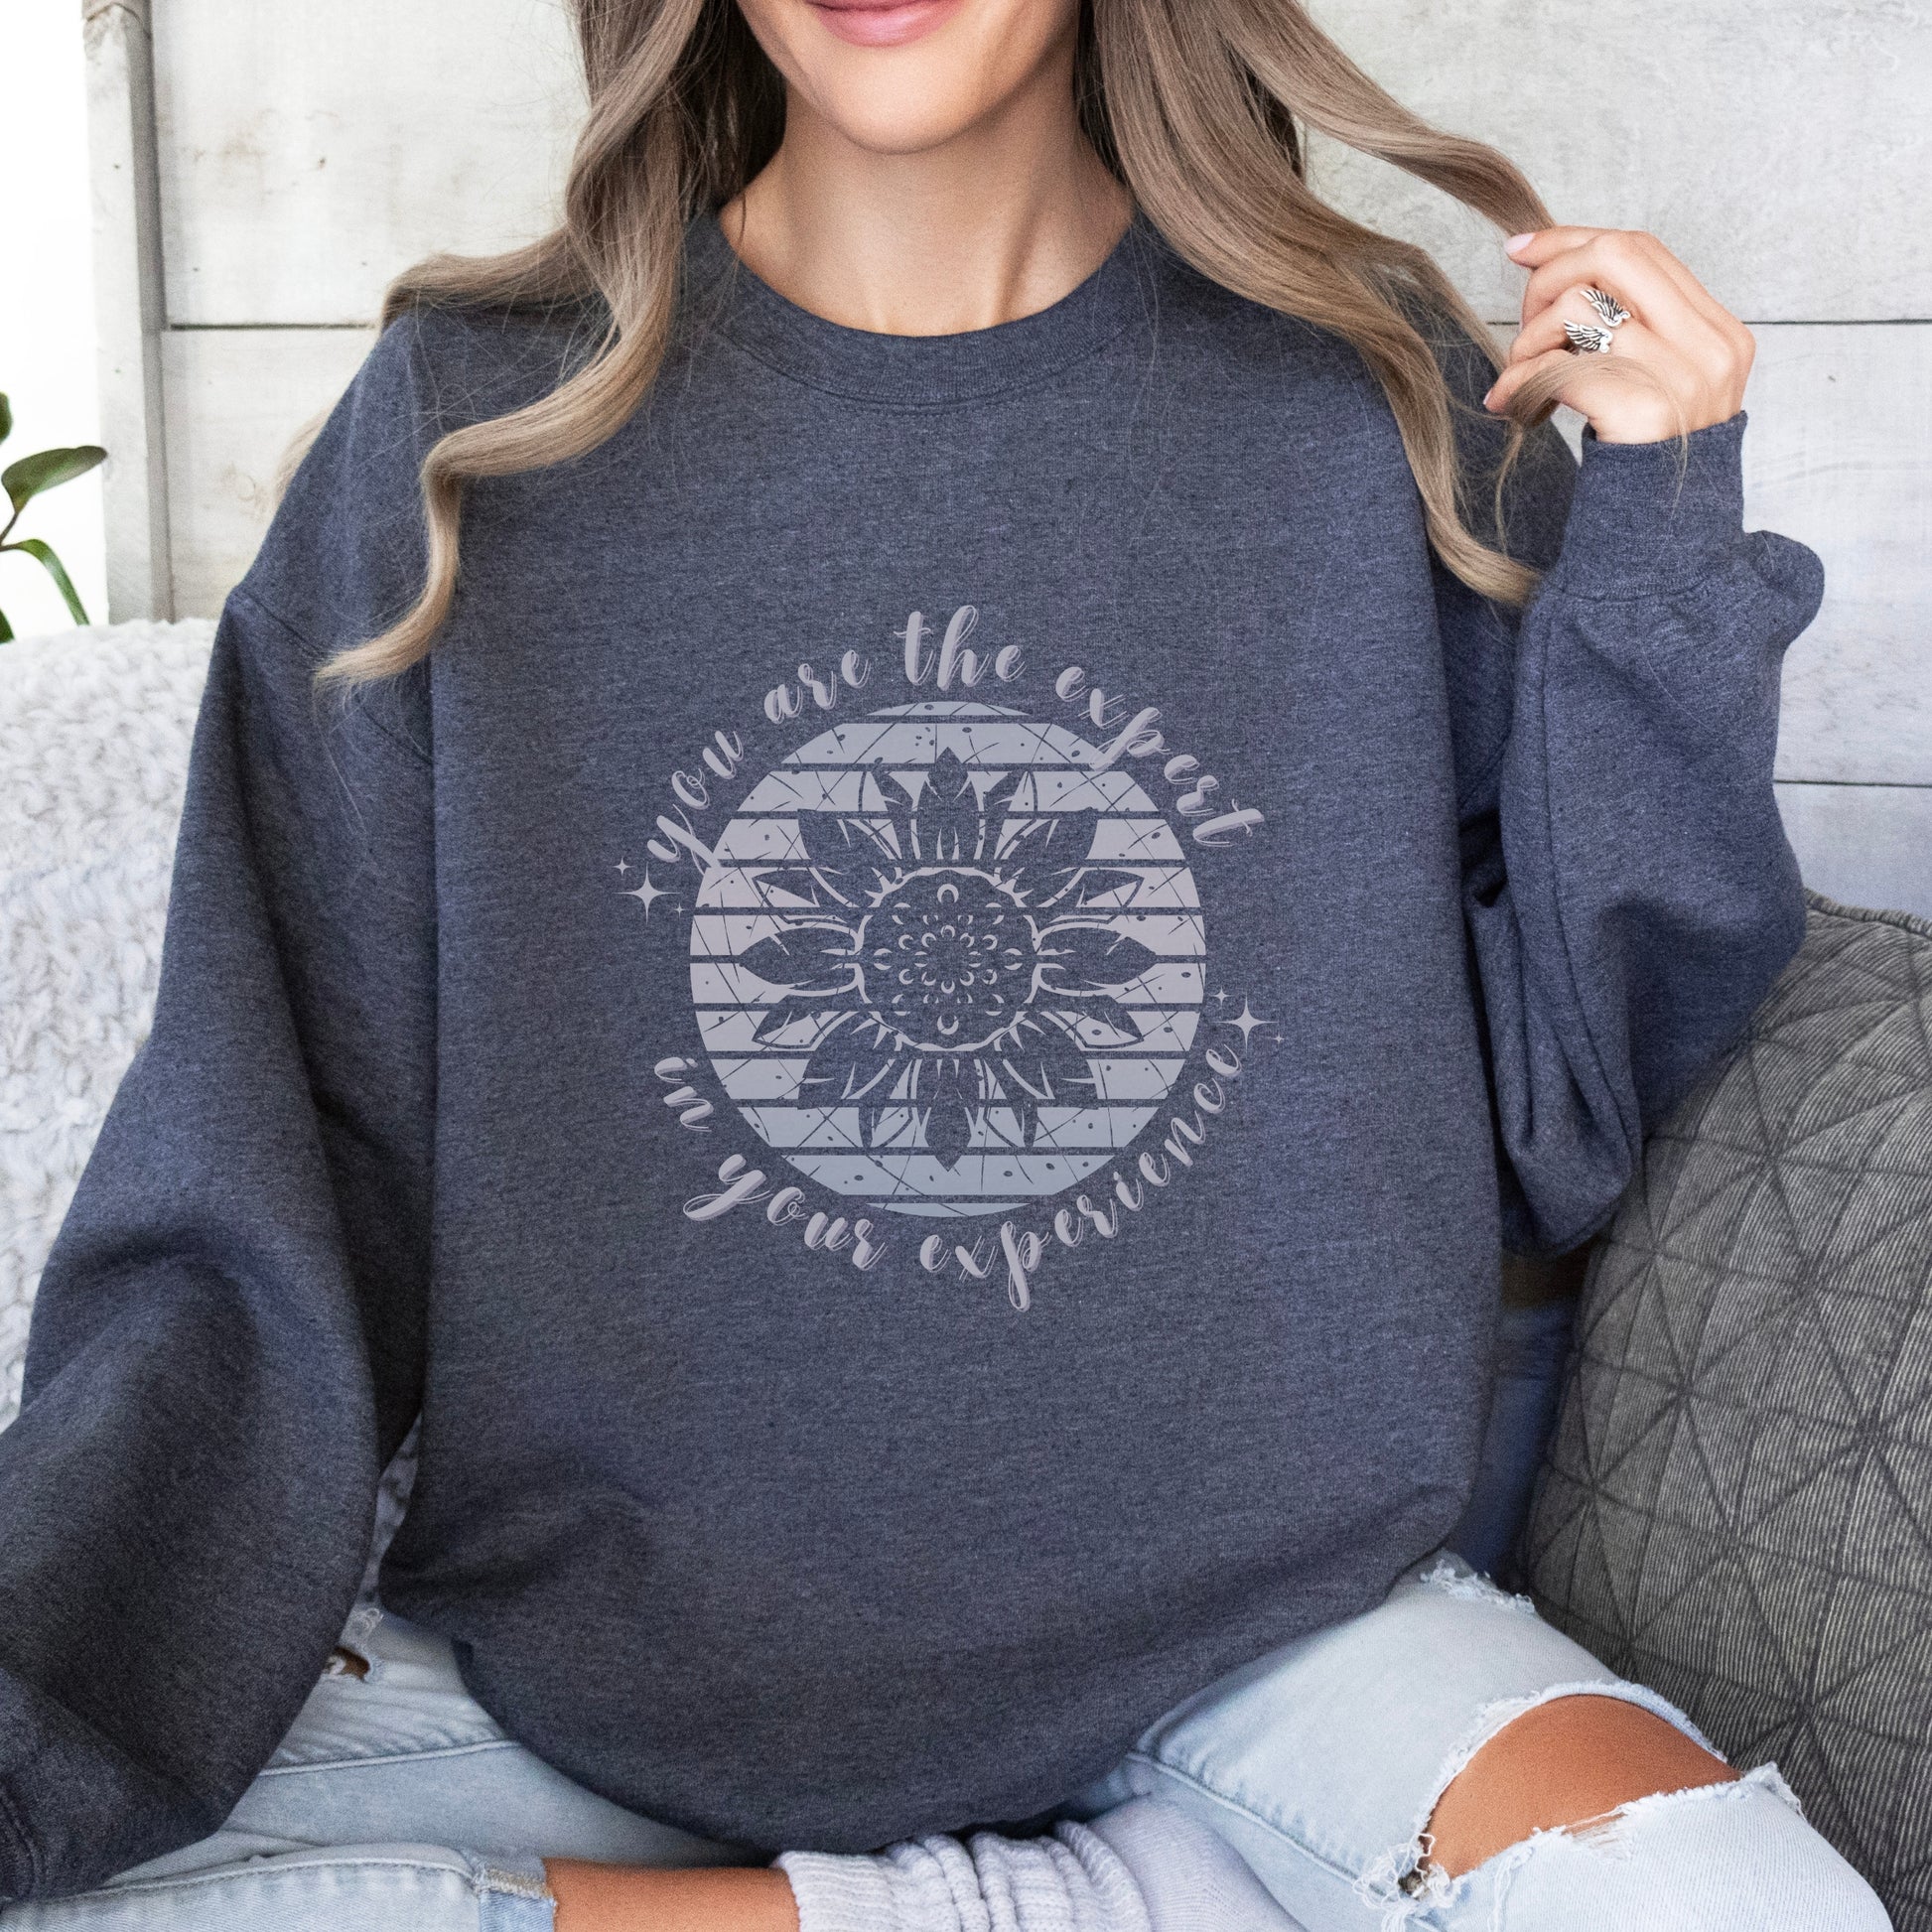 Mental health empowerment with our unique sweatshirt, tailored for survivors and advocates of abuse and trauma. The boho sunflower, a symbol of strength and growth, is surrounded by the powerful message, You are the expert in your experience.